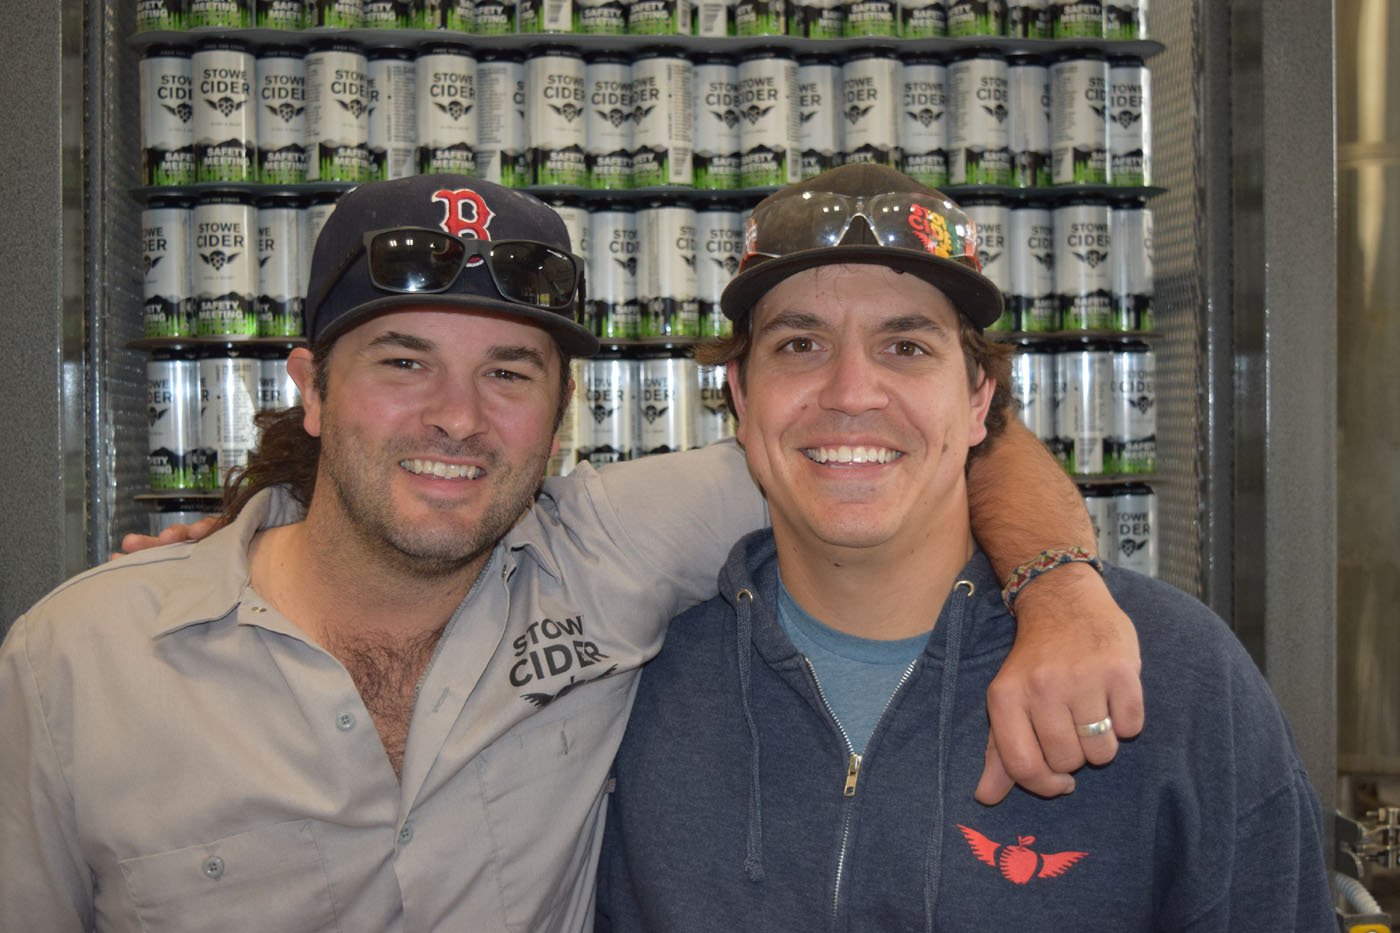 Mark Ray Co Owner and Stefan W. Windler Founder of Stowe Cider-1.jpg